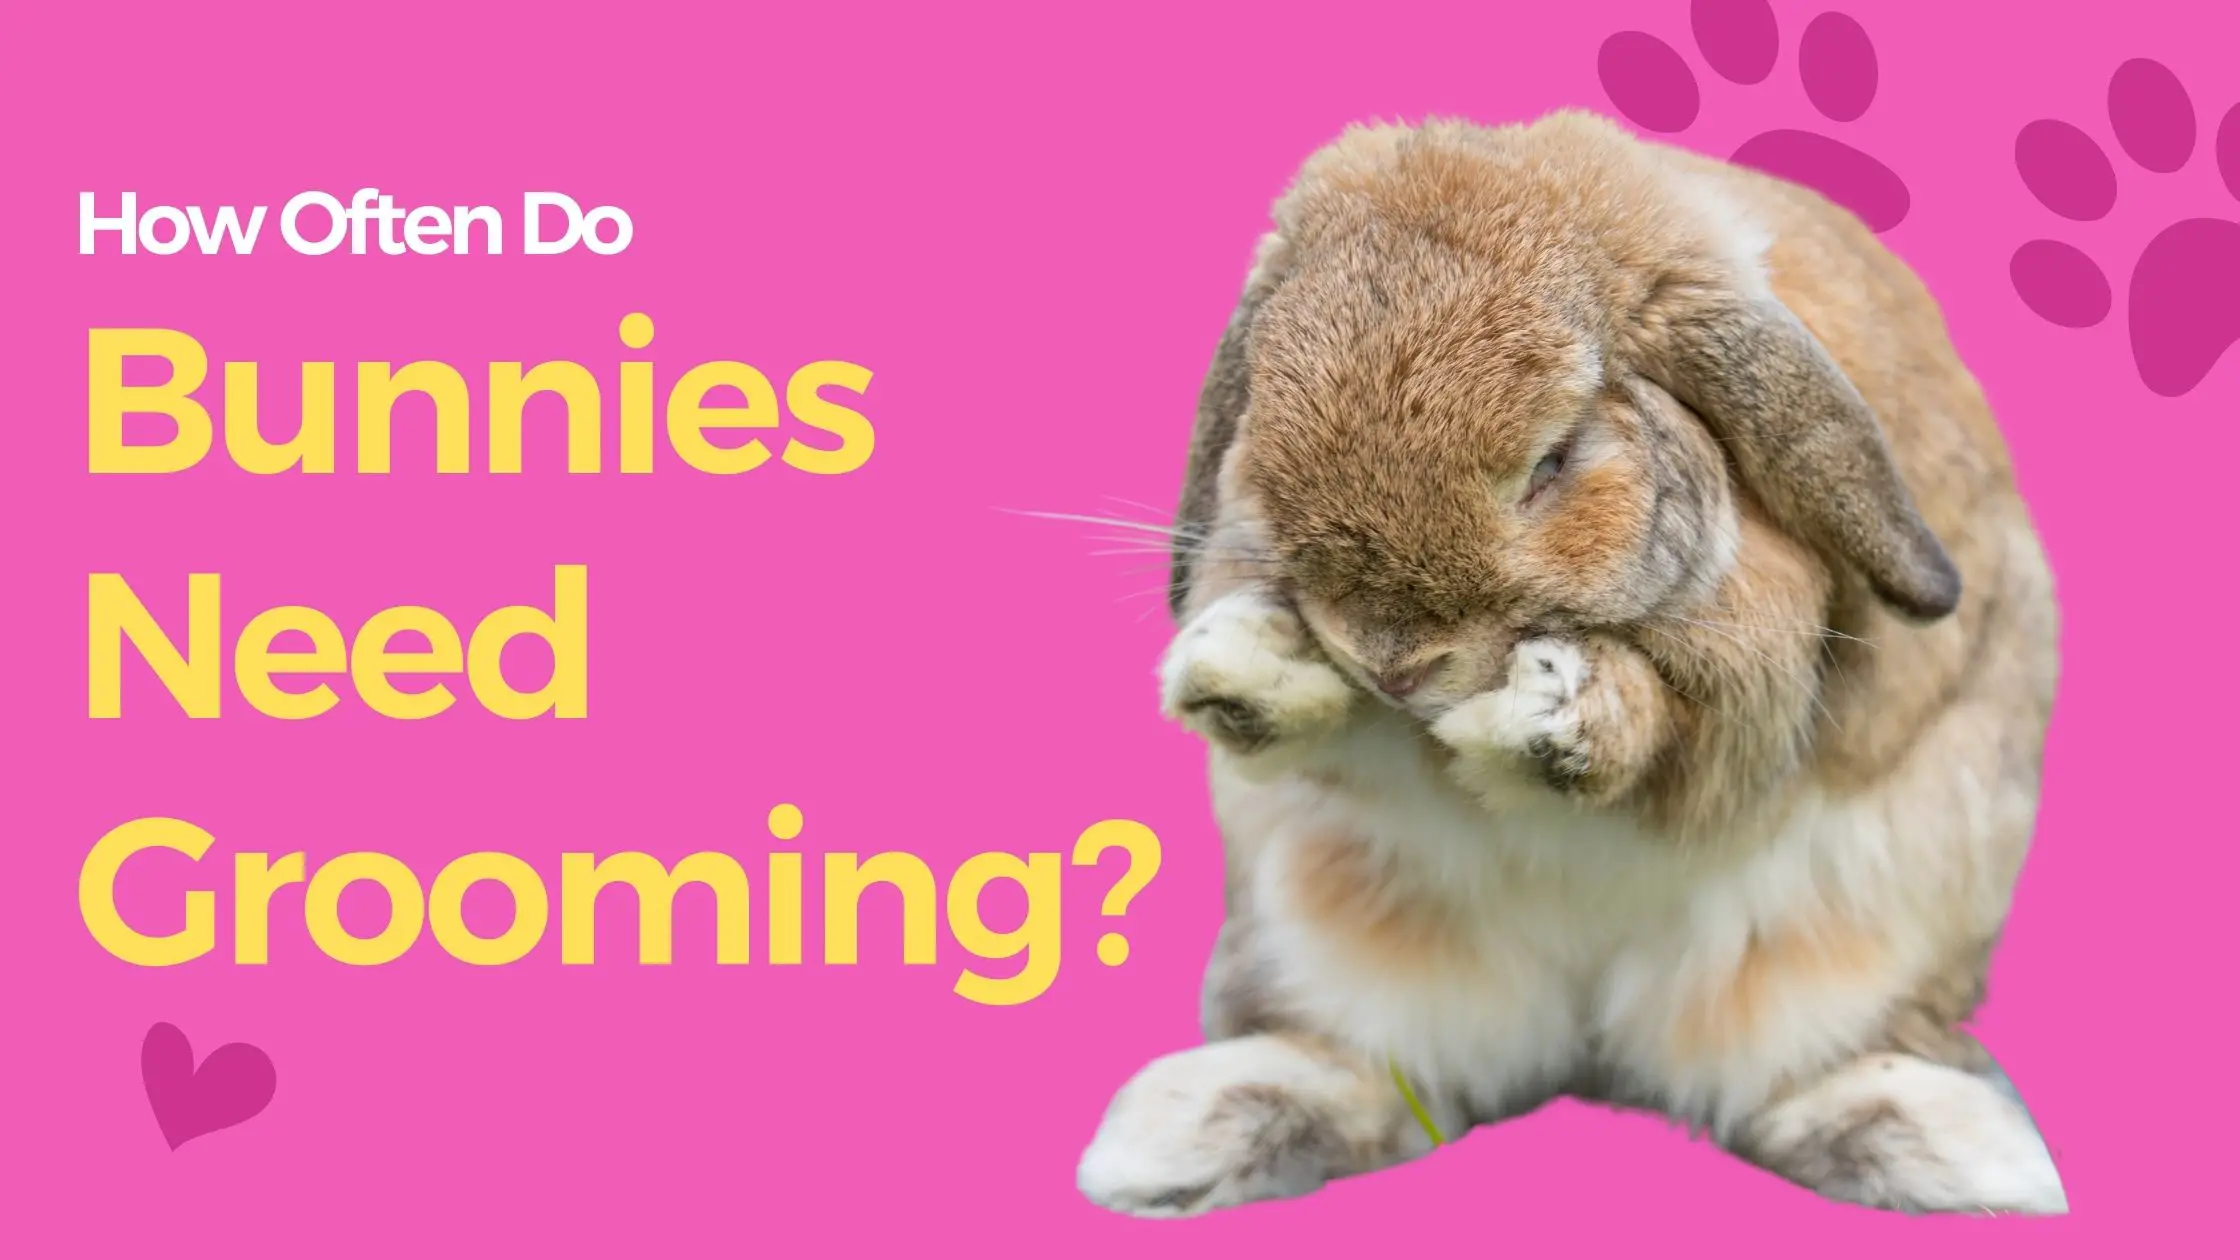 How much grooming do rabbits need?